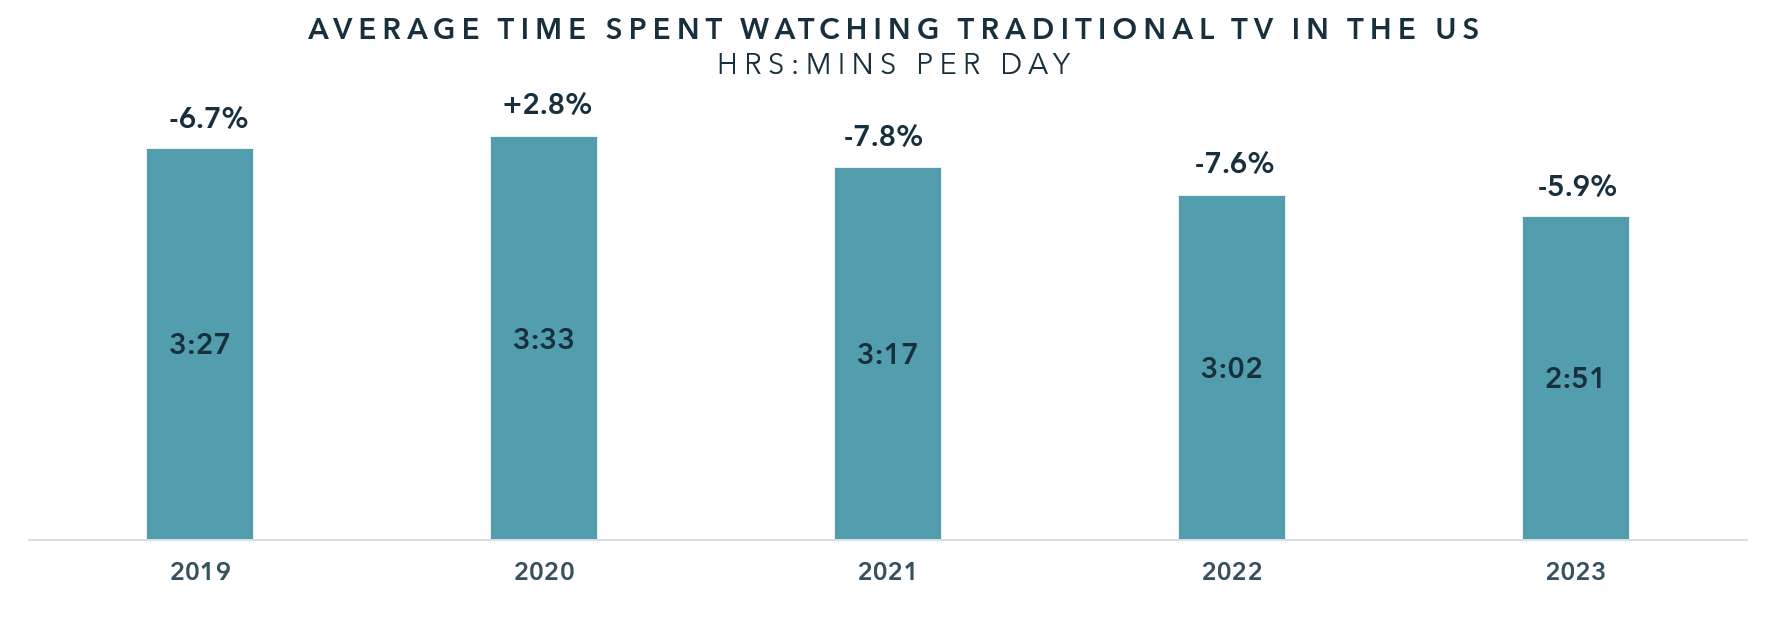 Consumer Trends Average Tv Watch Time